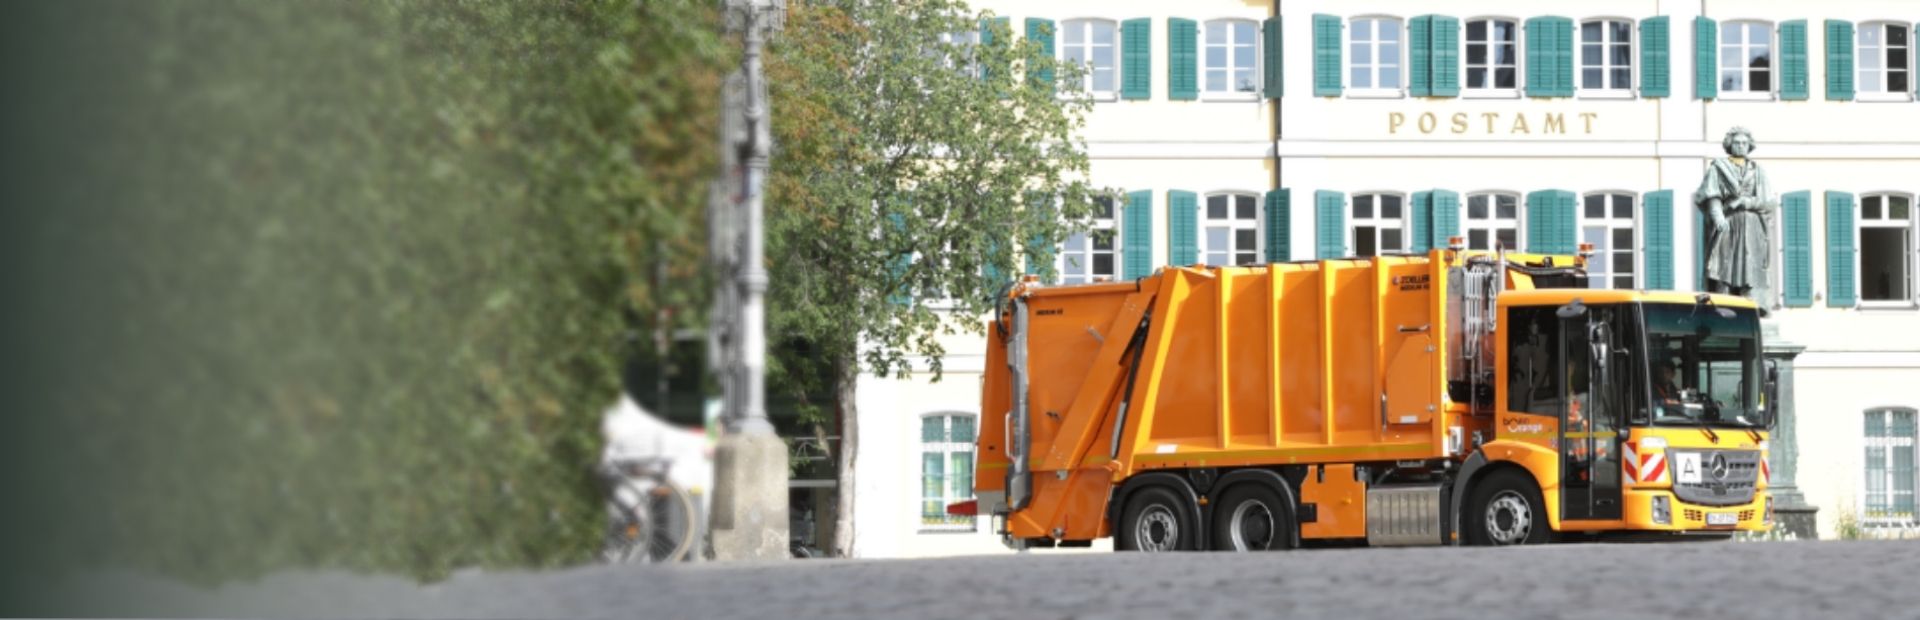 Waste collection vehicle in front of the Old Post Office with the Beethoven monument in Bonn